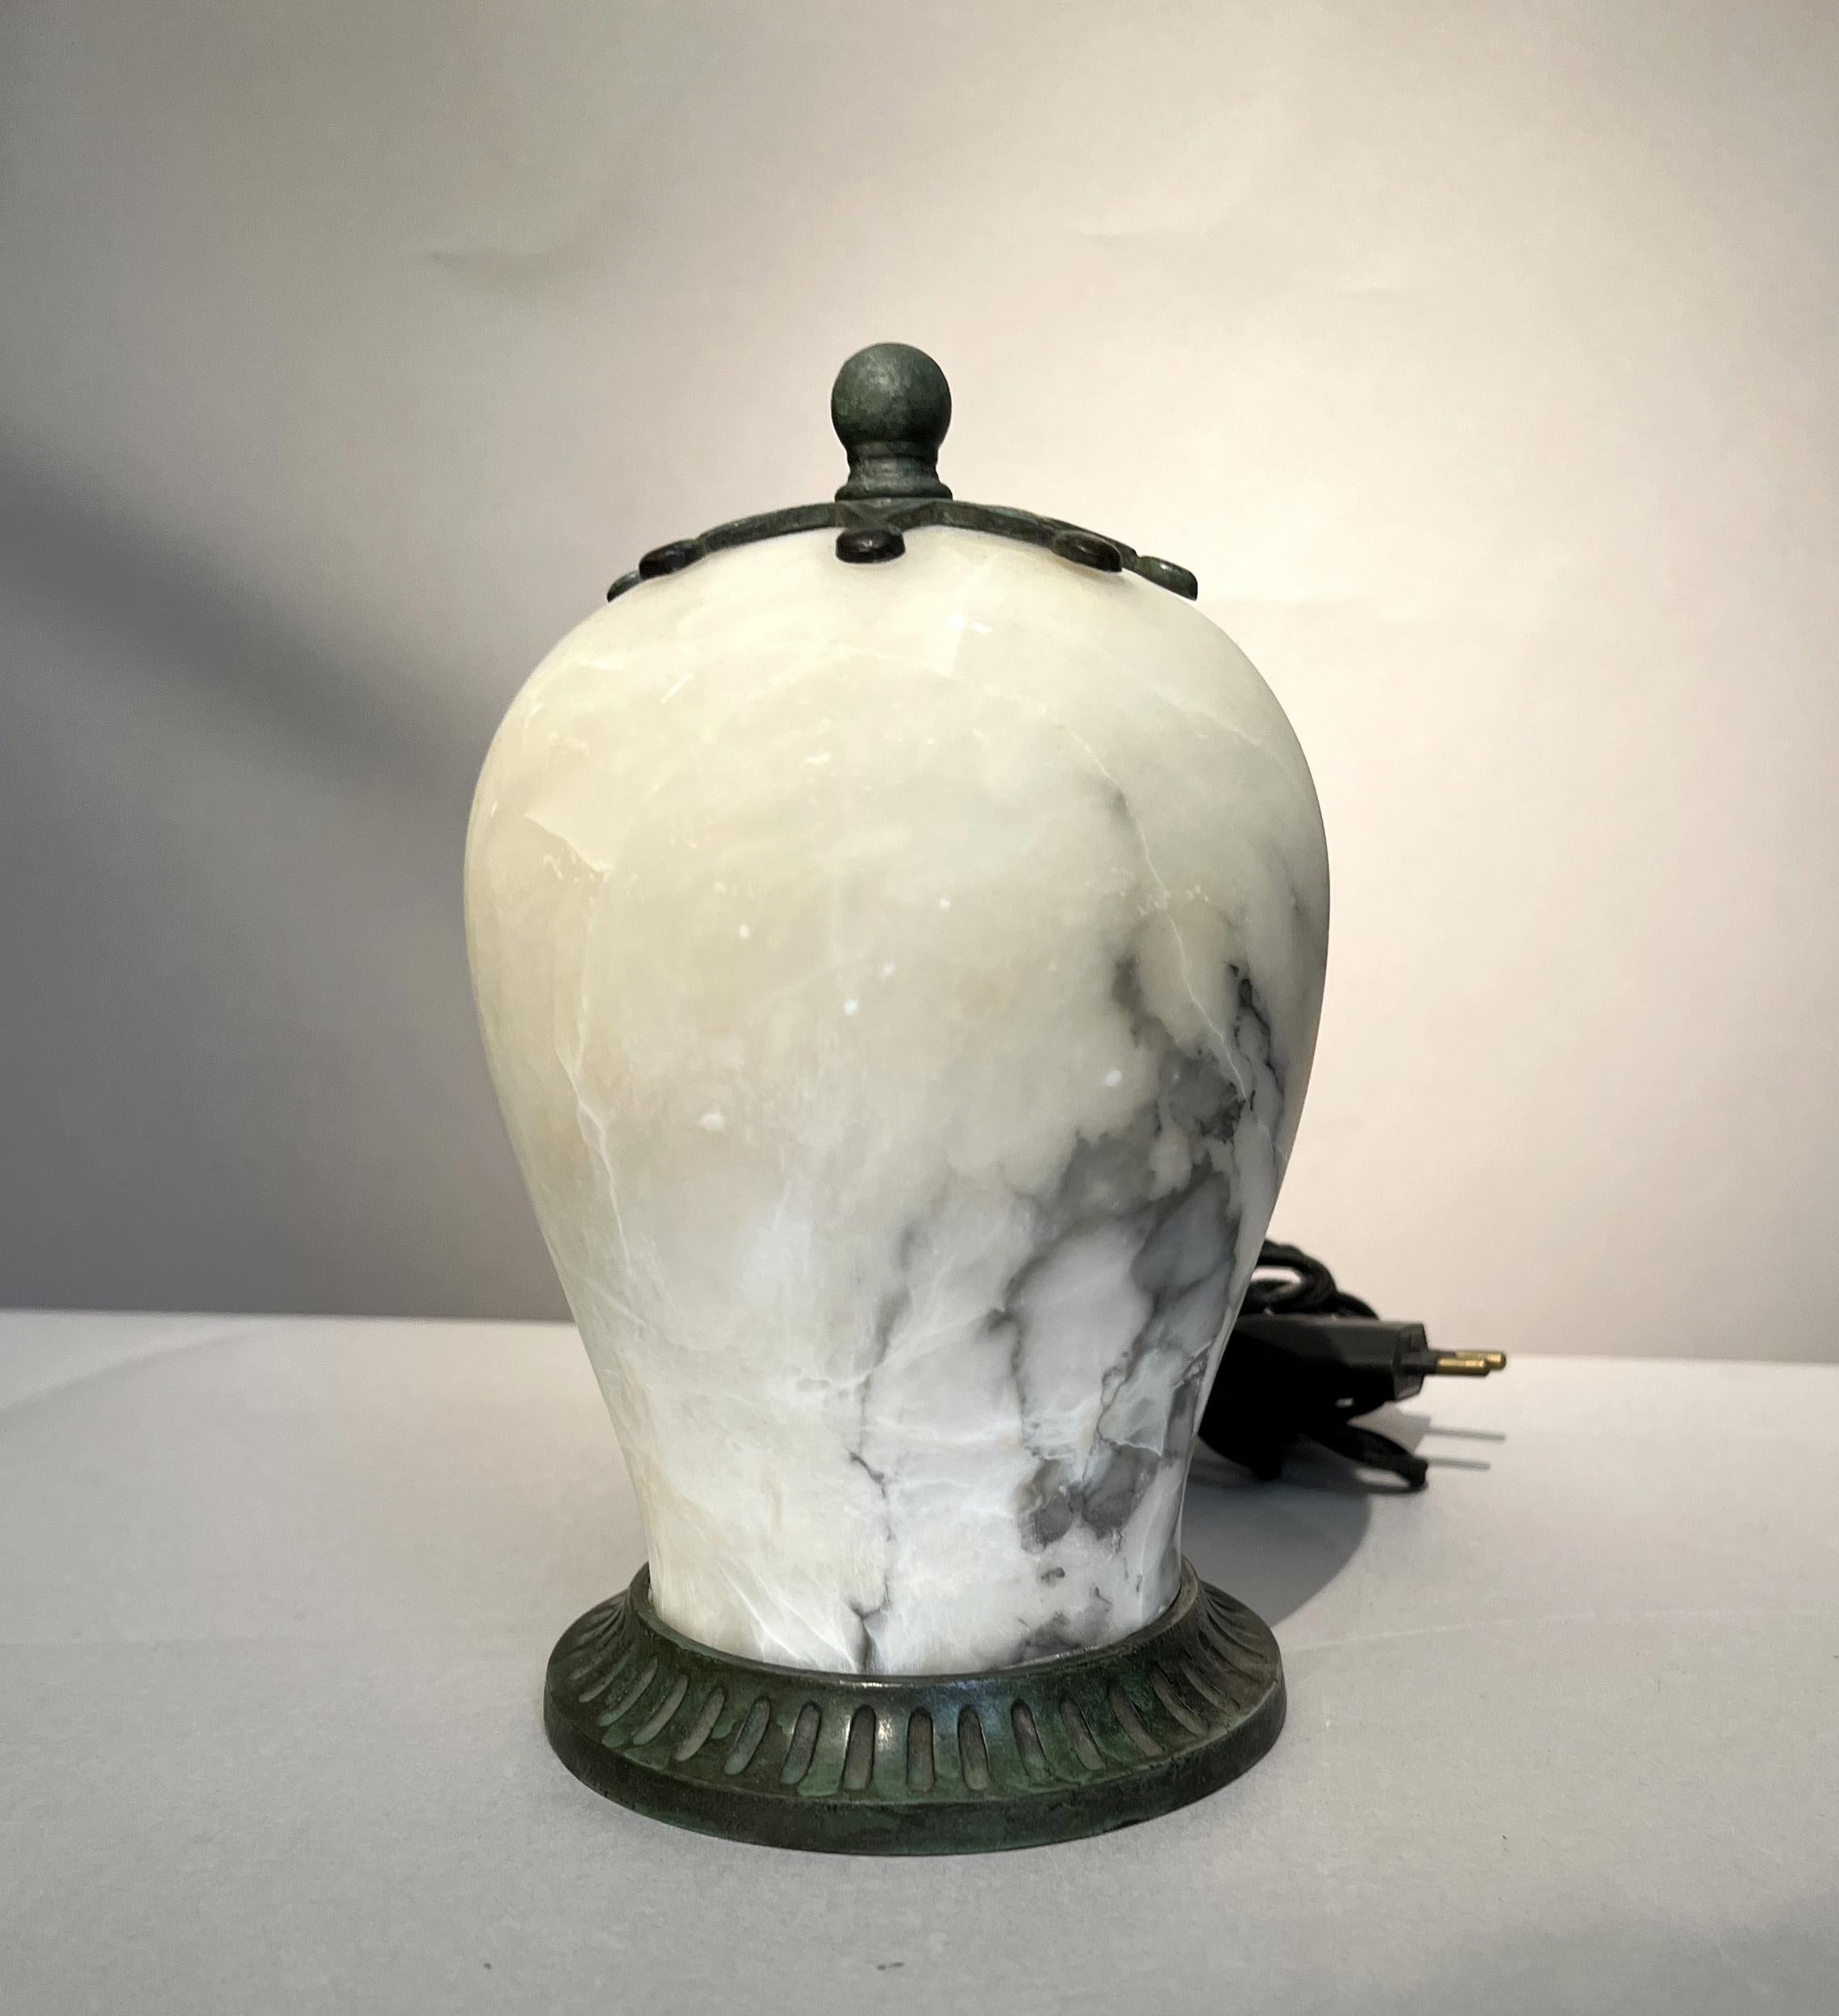 Pretty nightlight in alabaster and bronze with green and black patina.
Base decorated with flat gadroons, ovoid grip on a star-shaped plate.